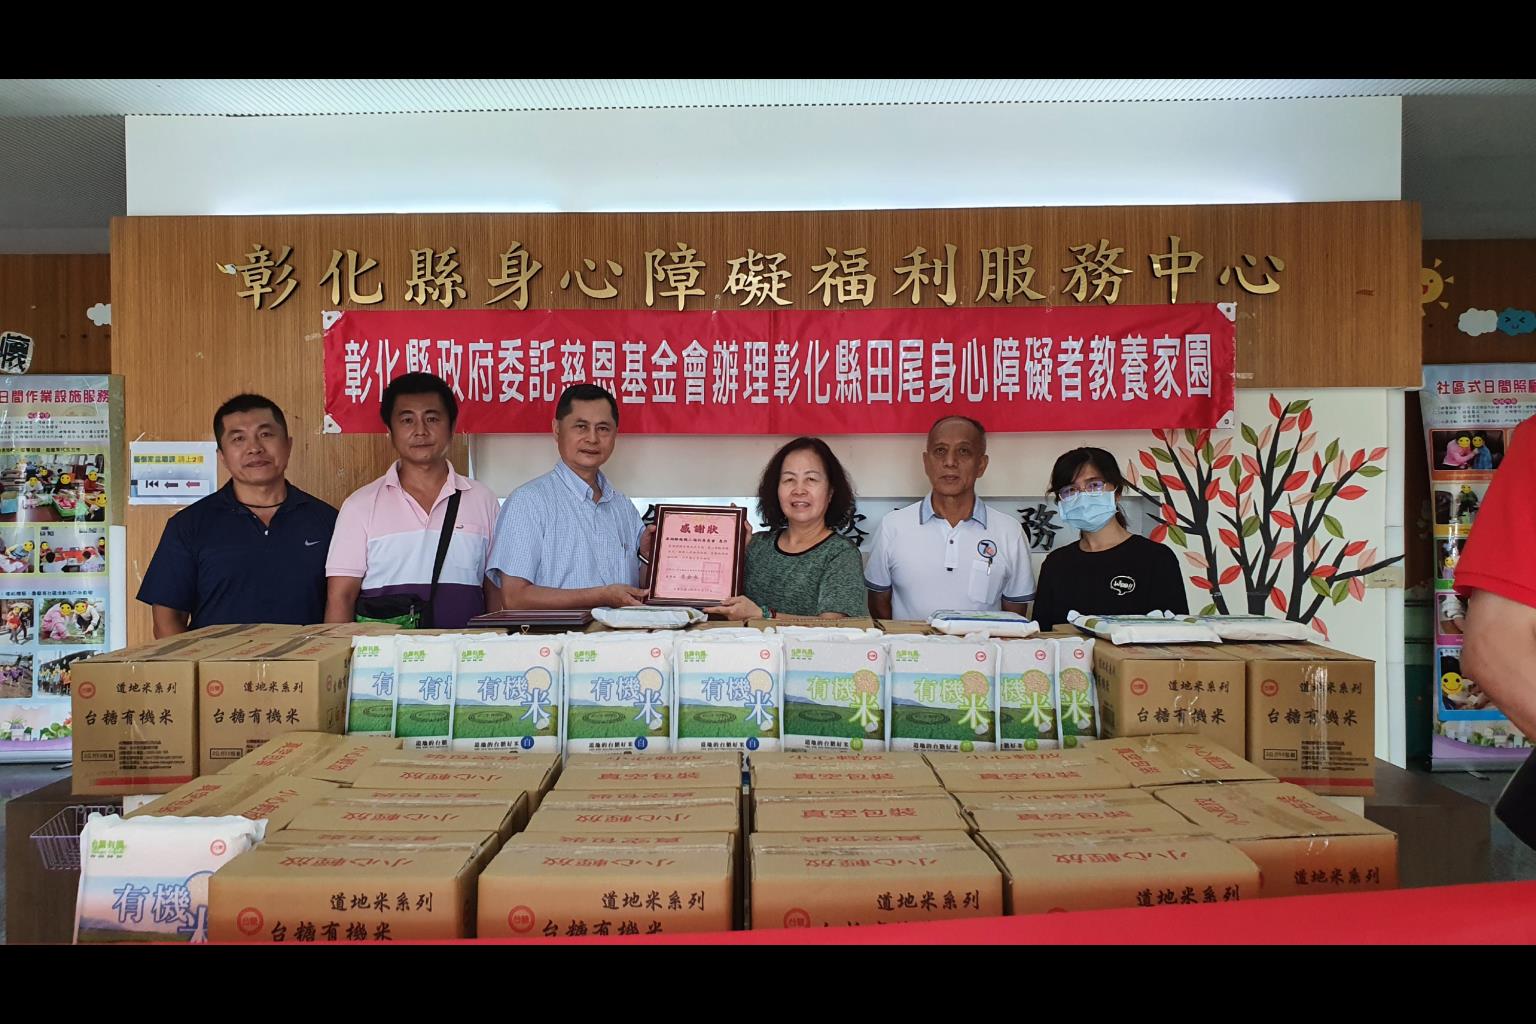 Picture of visit and making donation to the Private Tzuen Charity Social Welfare Foundation in Changhua County